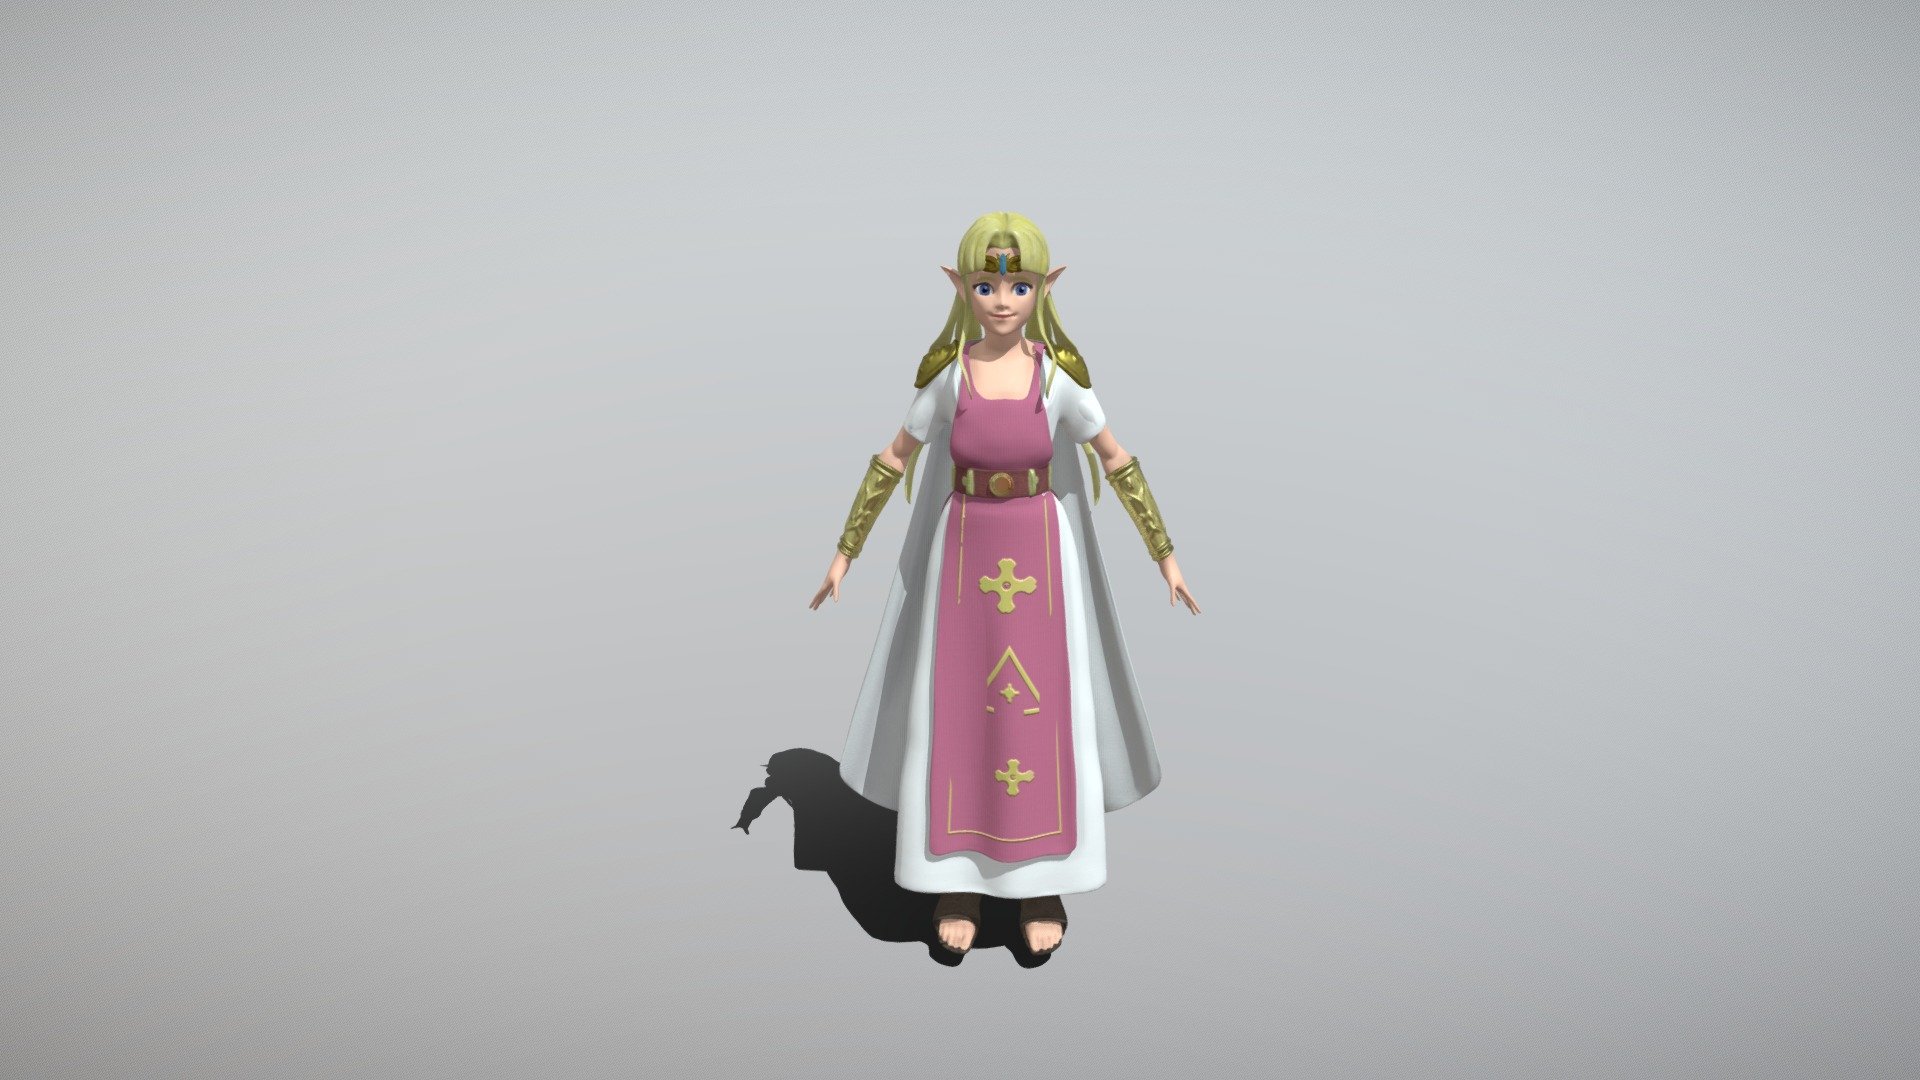 SS] I Was Messing Around with 3D Models from Different Zelda Games